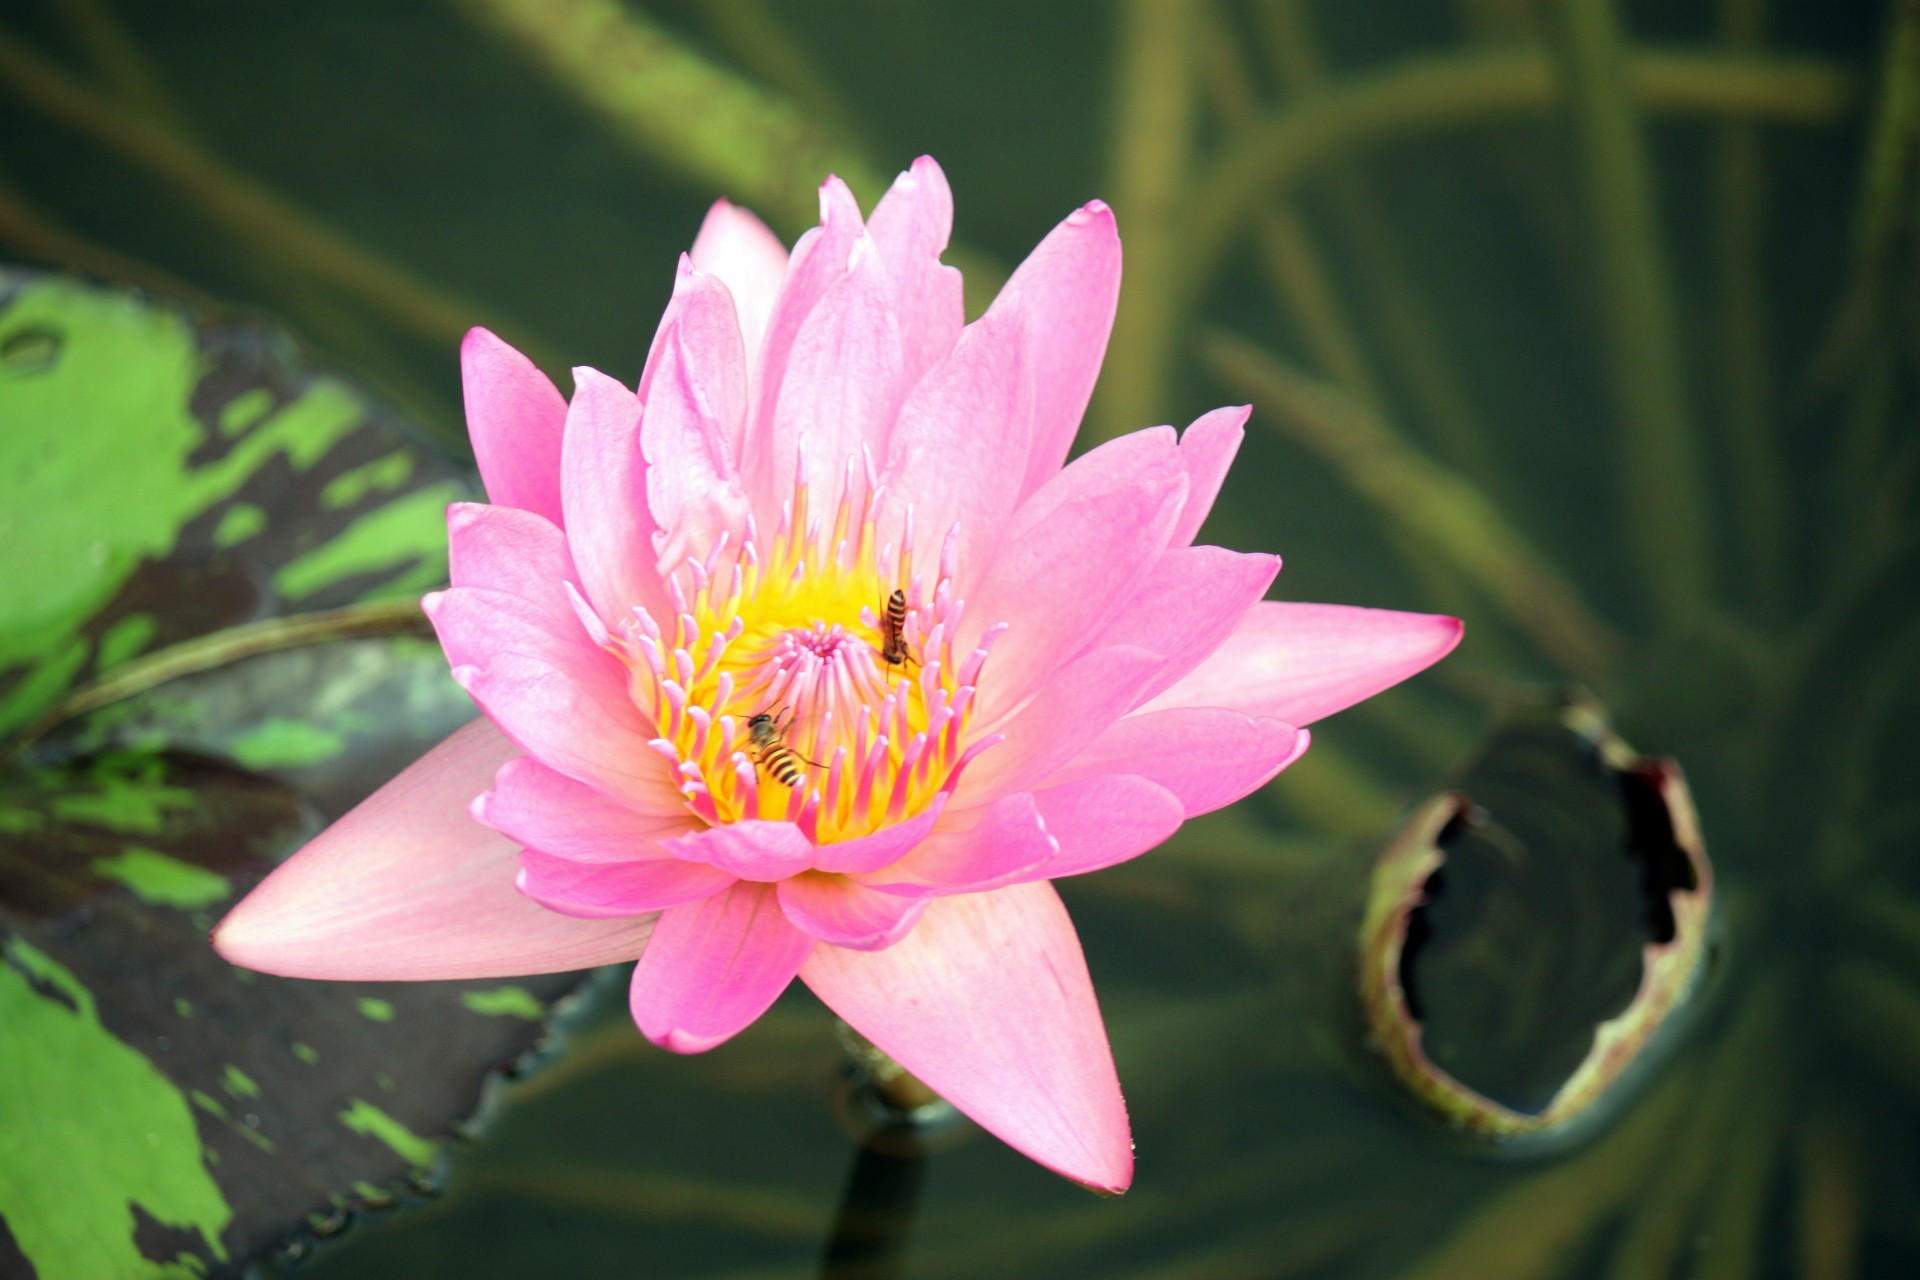 pink lotus blossom bees collecting honey bee worker free photo